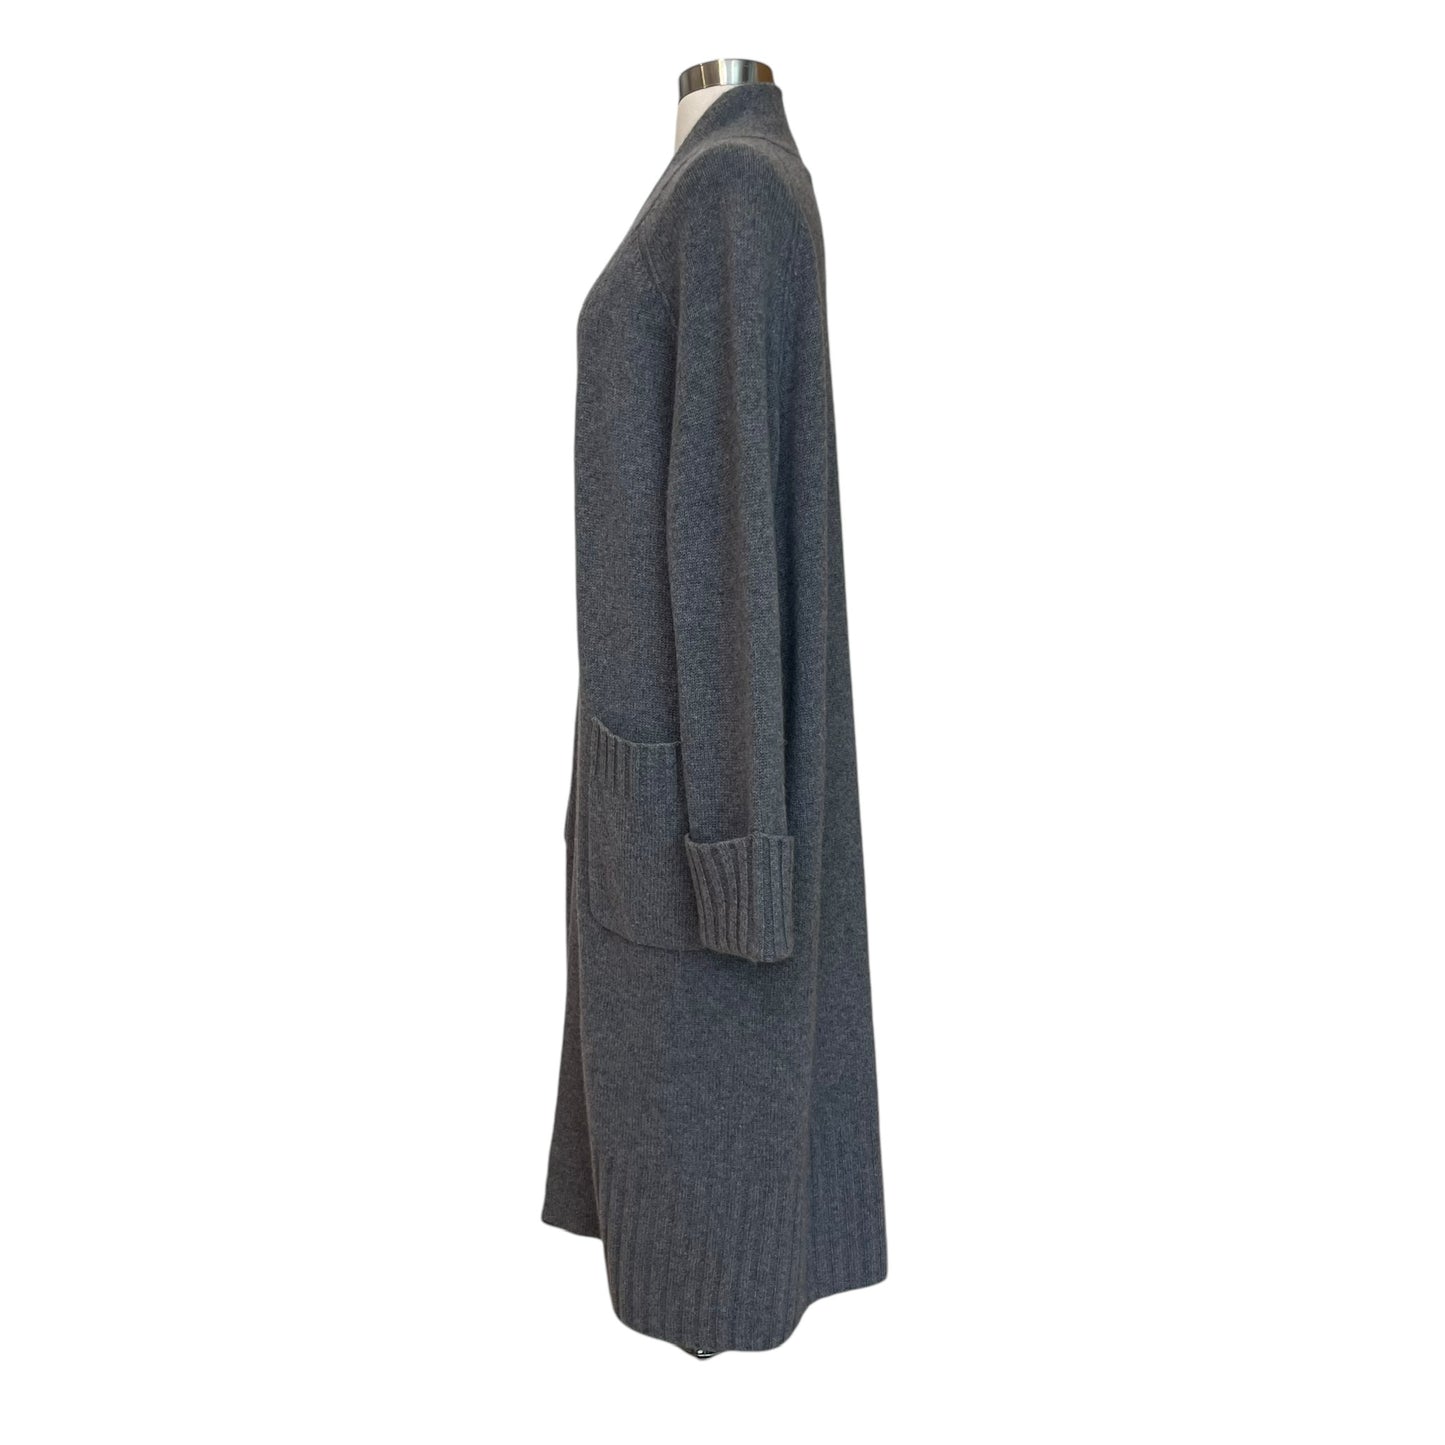 Grey Oversized Cashmere Duster - S